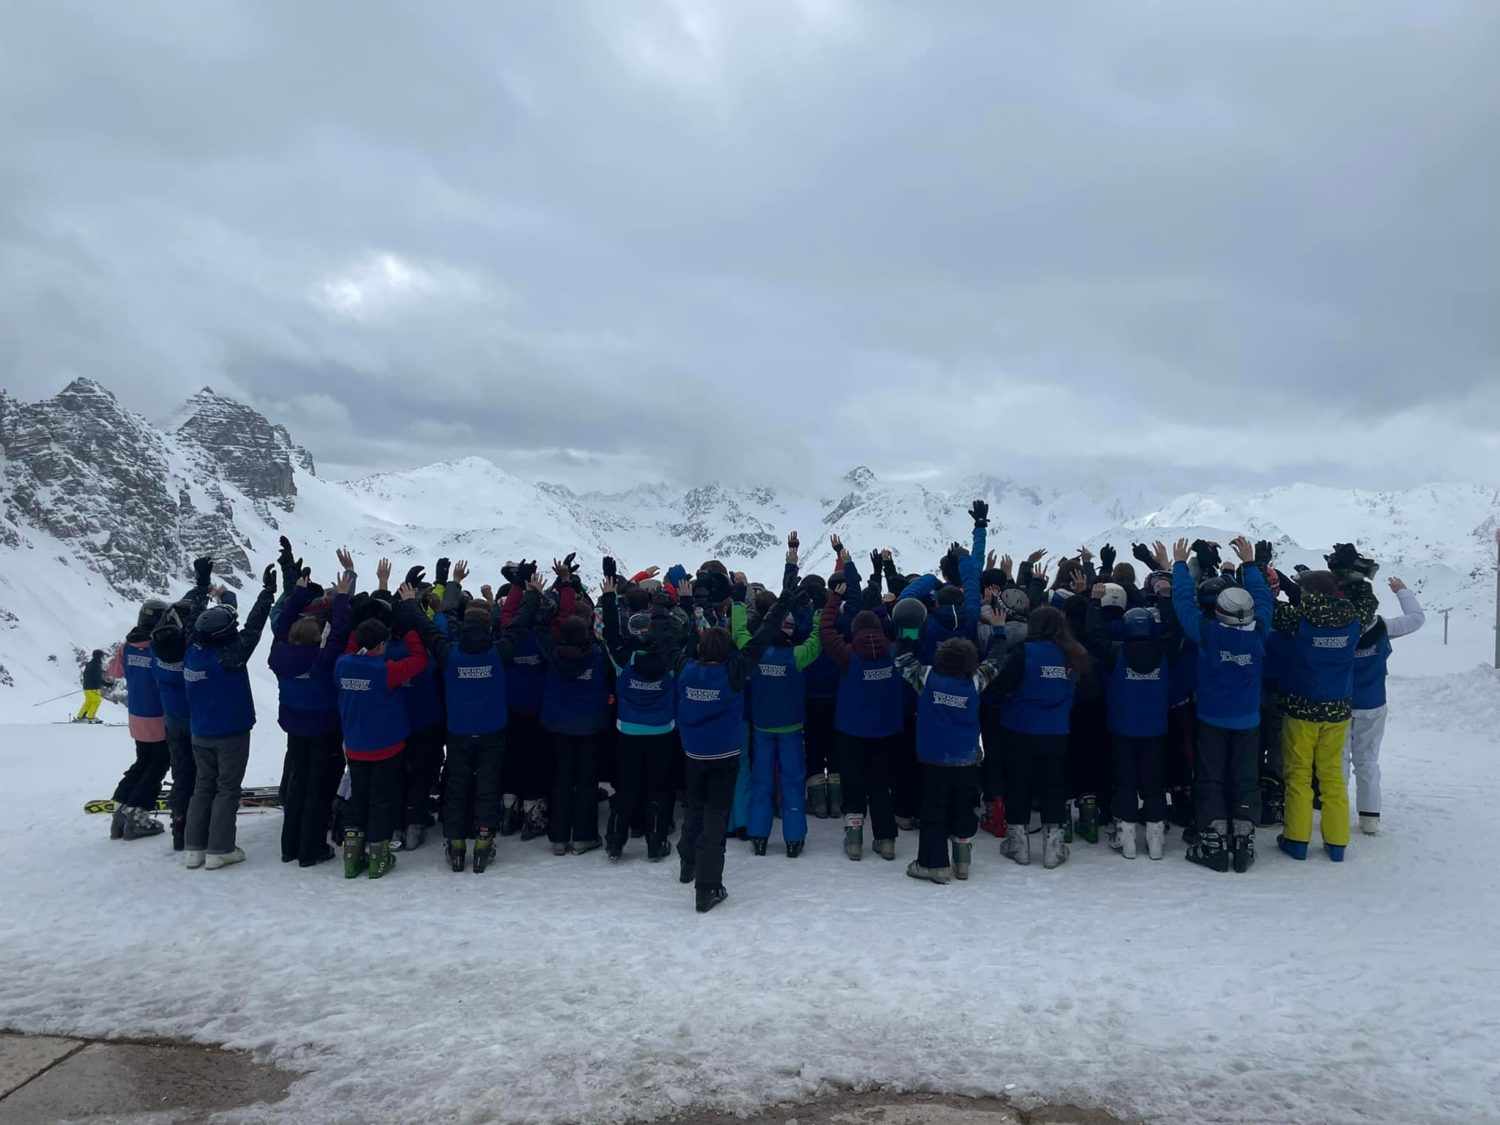 A large group of LAB students are pictured huddled together in a crowd whilst on a Ski Trip in Austria.